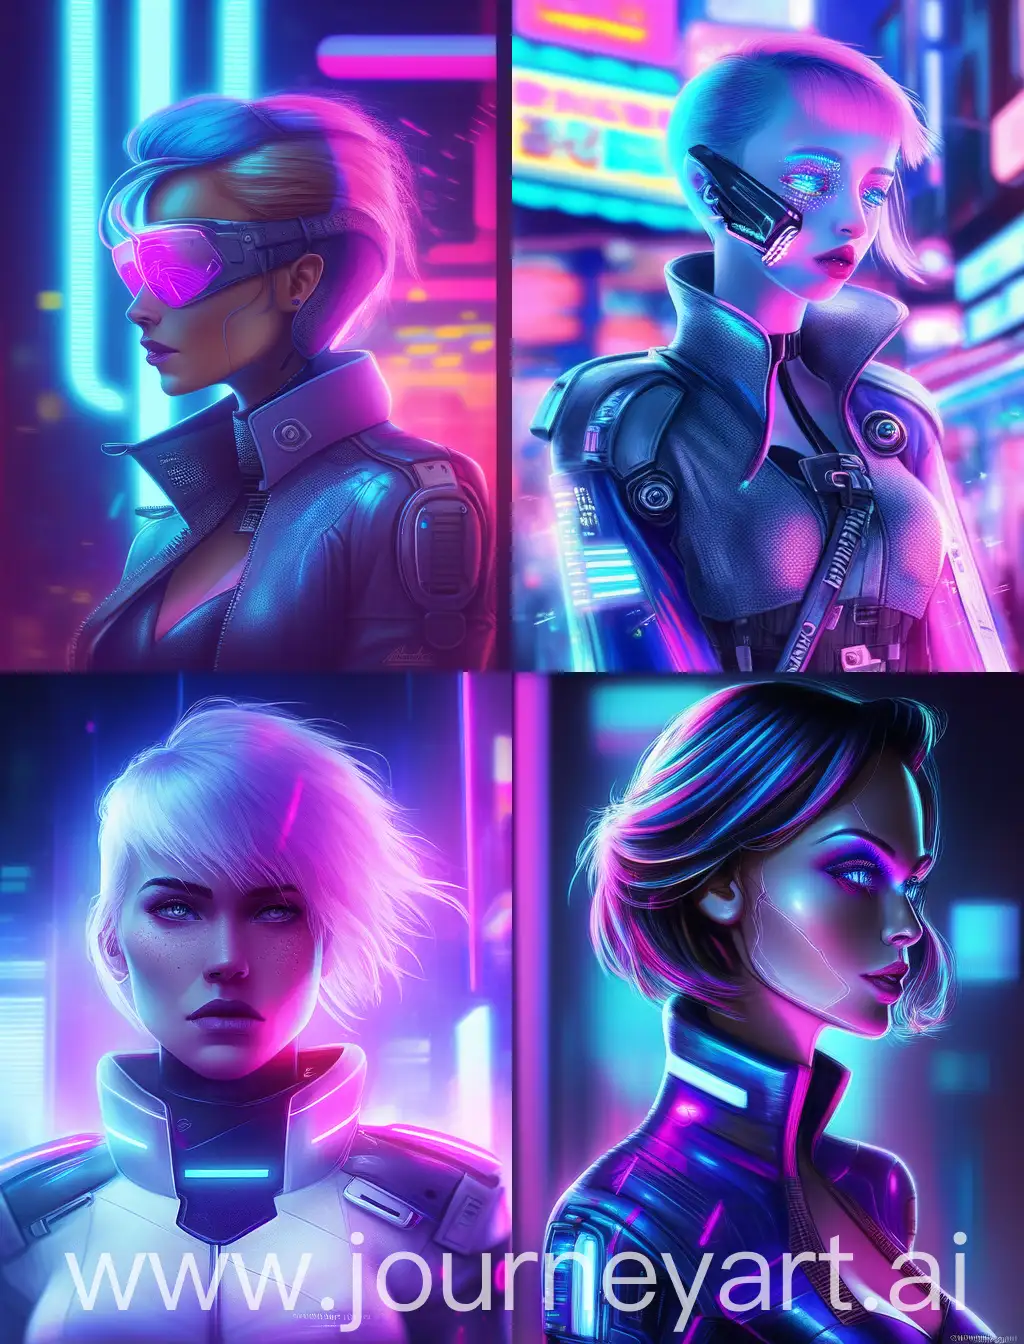 beautiful woman, translucent glass techpunk, cyberpunk, with subtle pink and blue gradients, neon lights, backlight, pastel colours, sci-fi, realistic, futuristic.